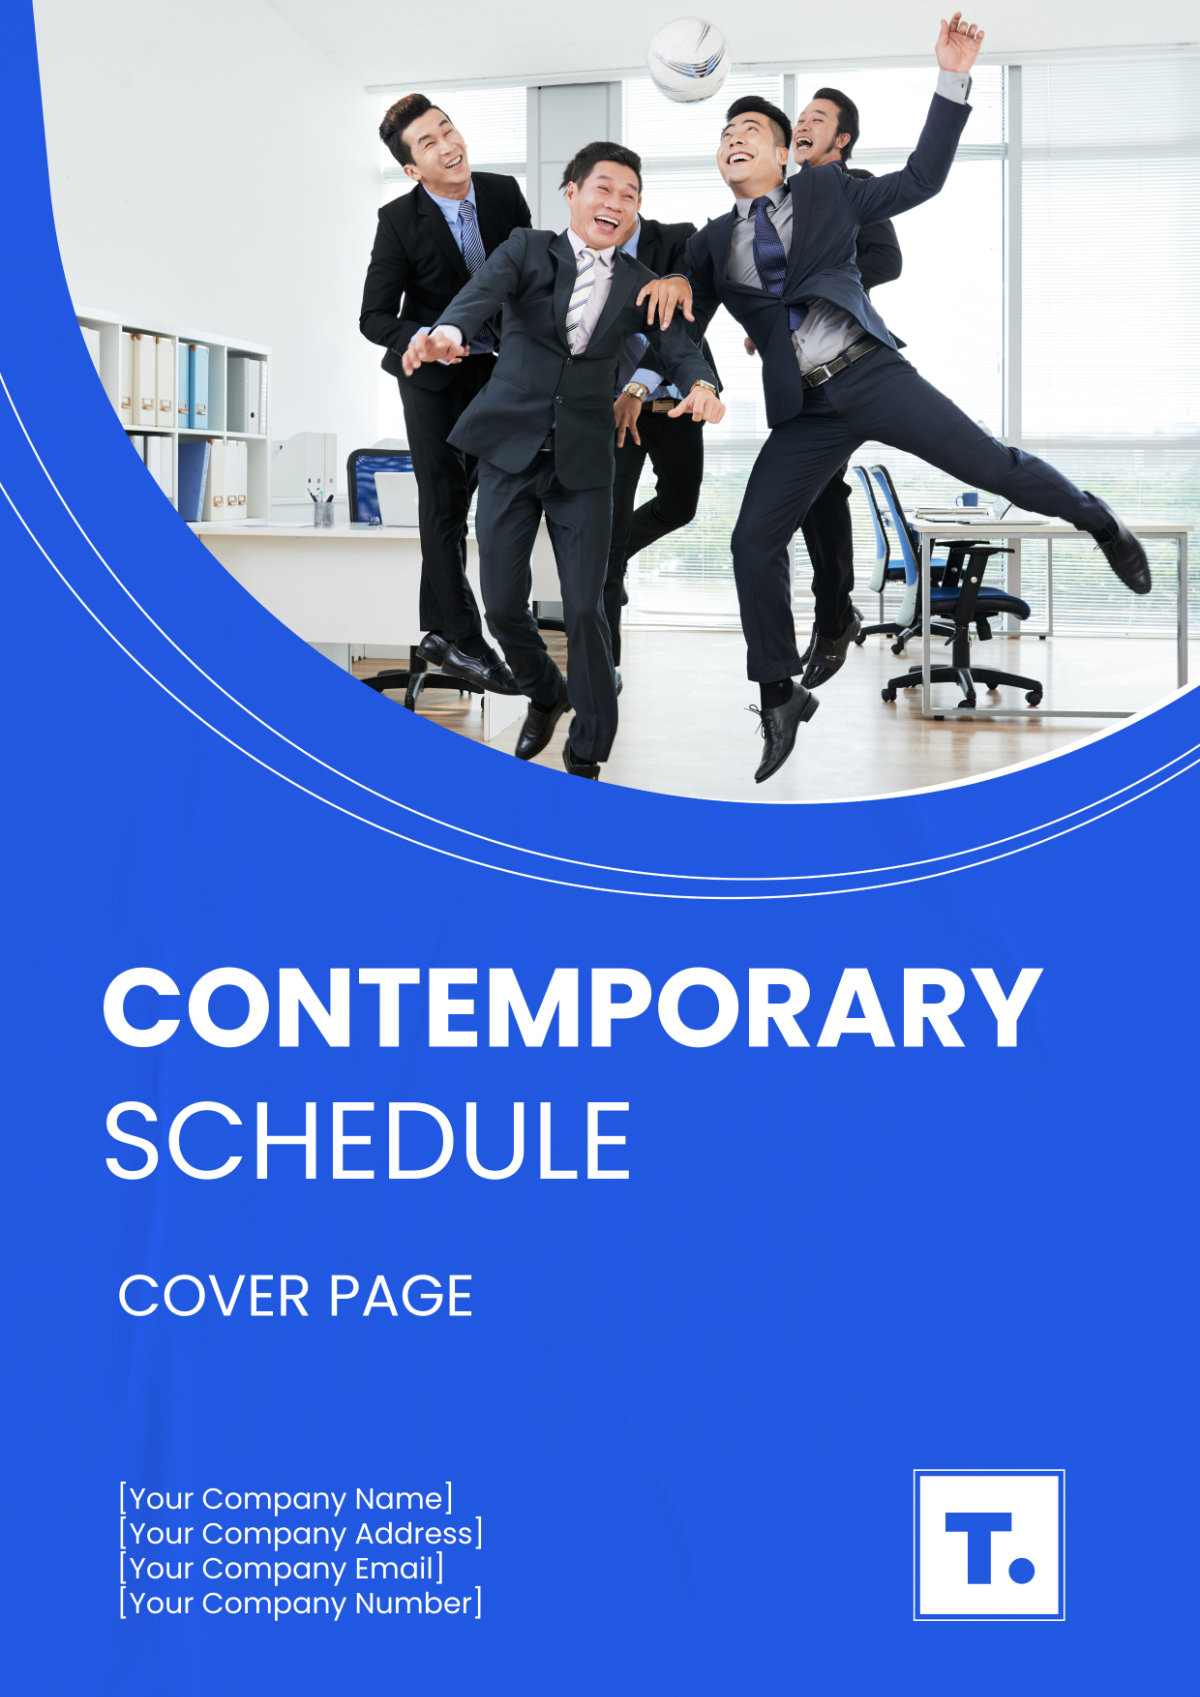 Contemporary Schedule Cover Page